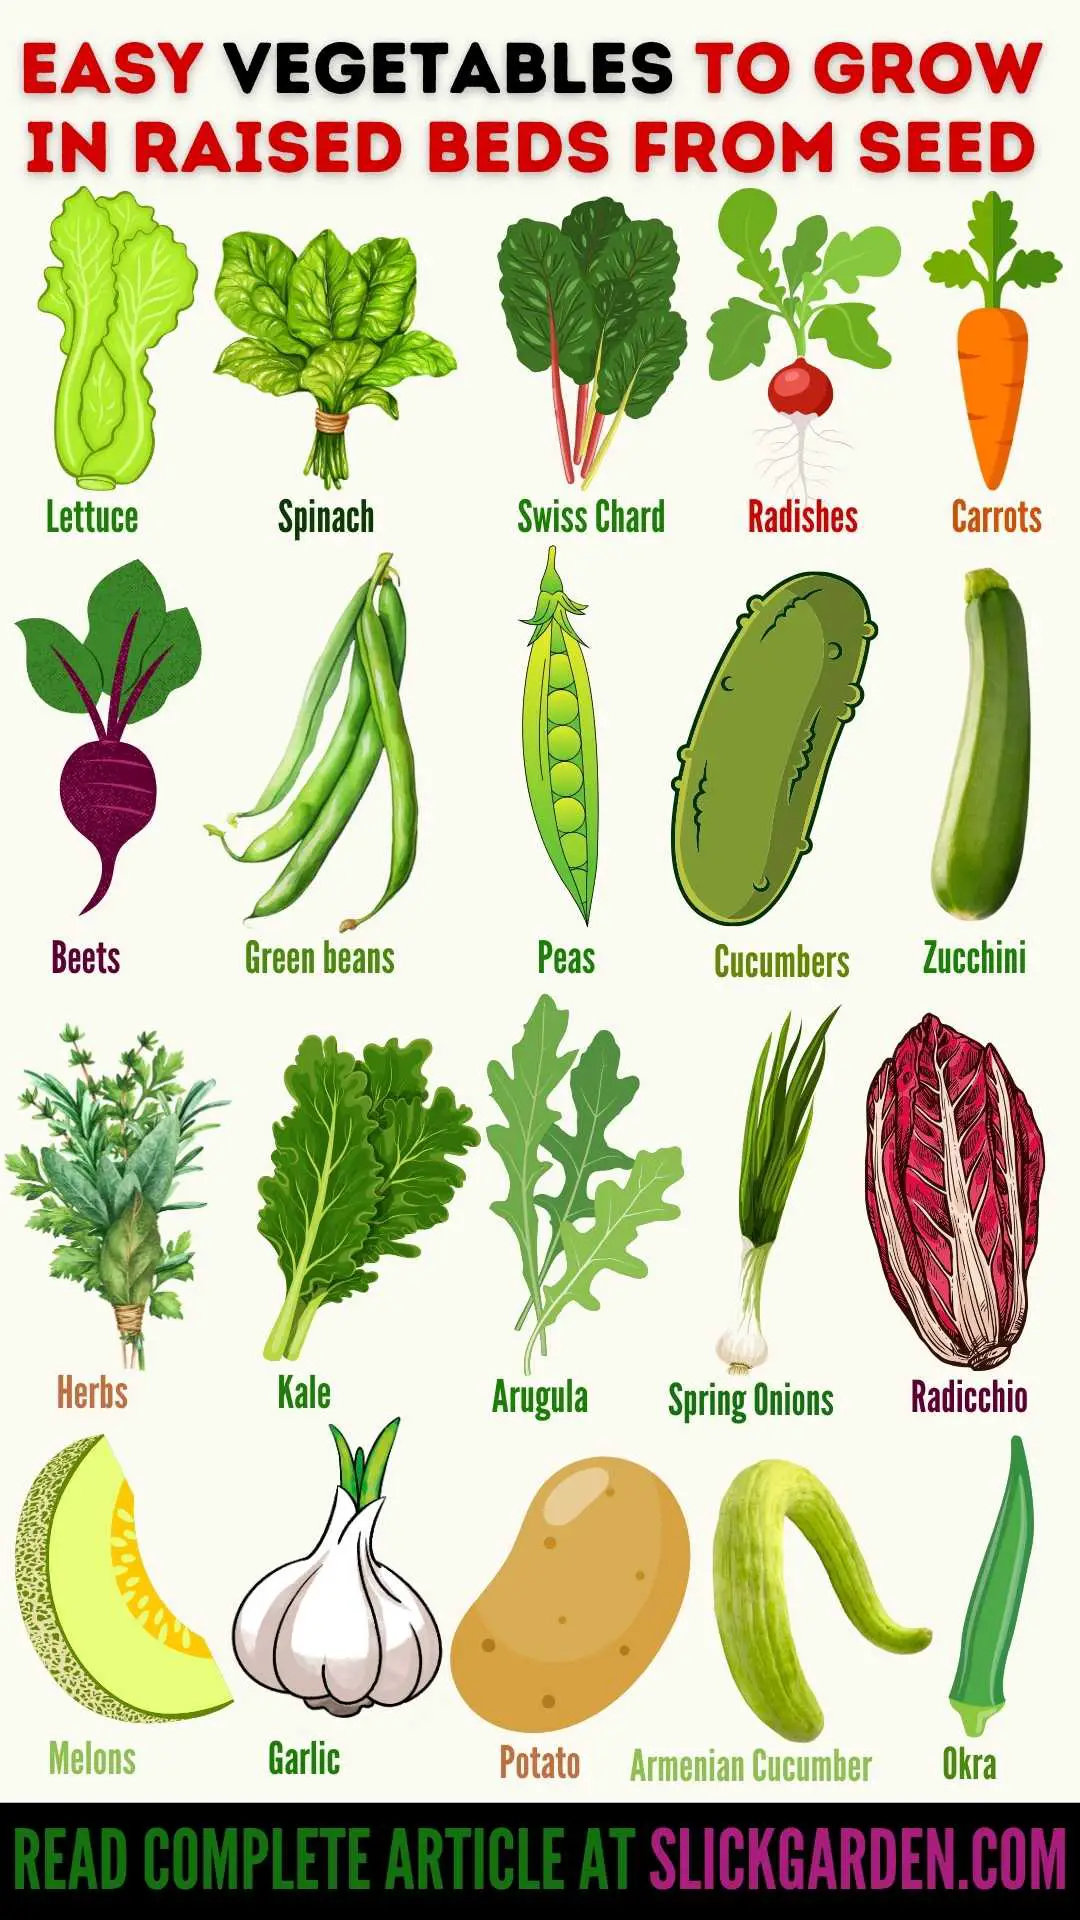 23 Easy Vegetables To Grow In Raised Beds From Seed infographic